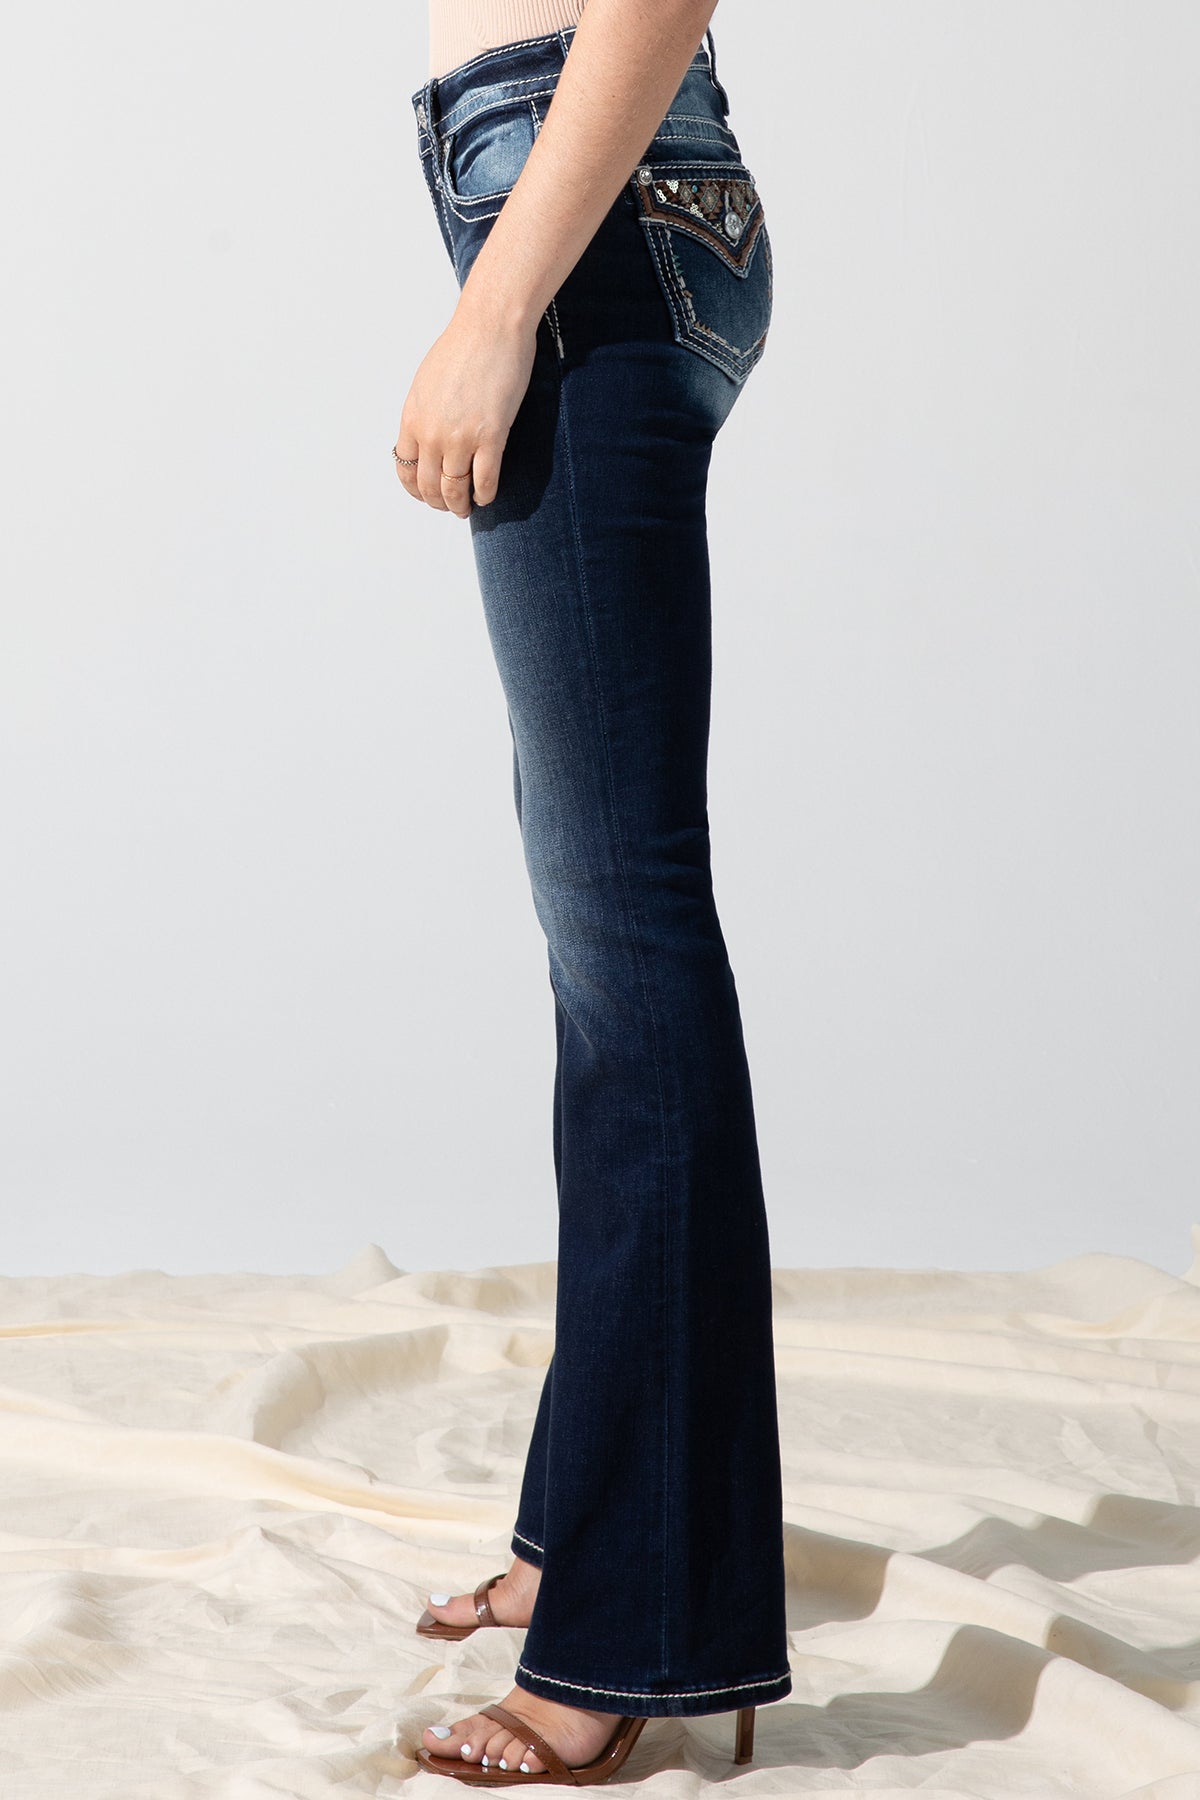 Aztec Accent Bootcut Jeans | Only $101.15 | Blue | Miss Me